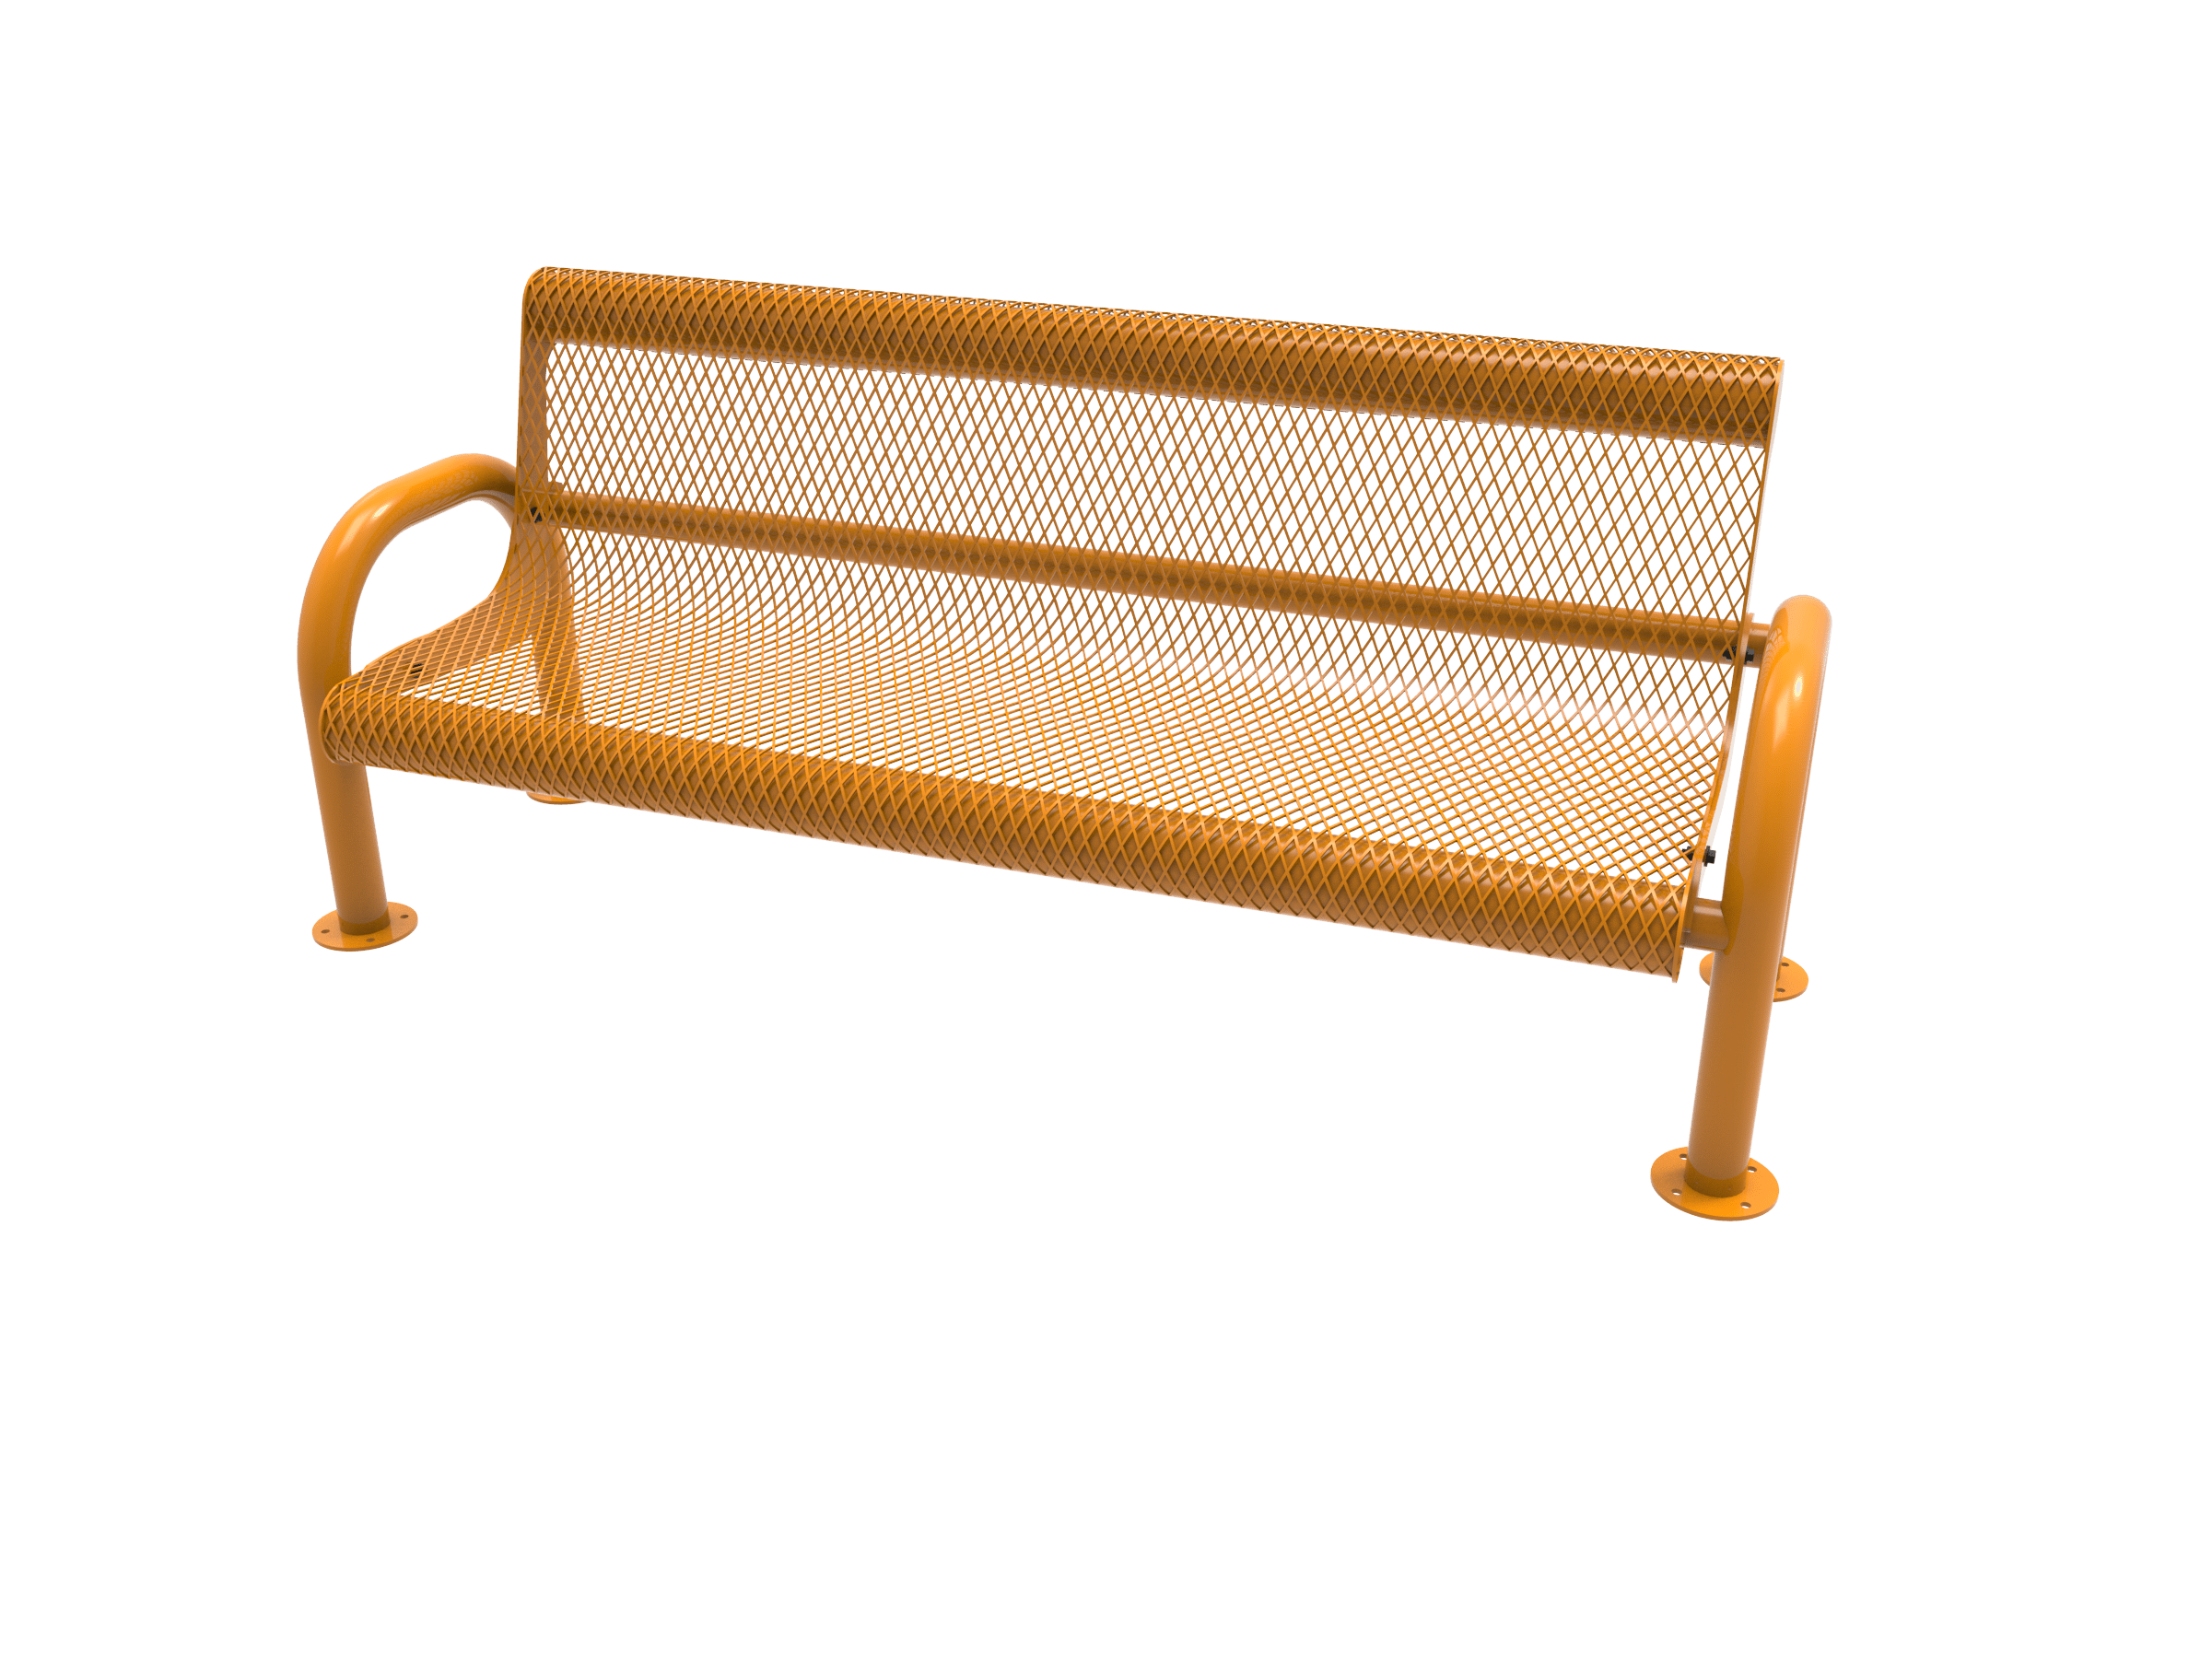 6′ Bench With Back  Surface-Mesh
BMD06-C-54-000
Industry Standard Finish
$1019.00
BMD06-A-54-000
Advantage Premium Finish
$1269.00
